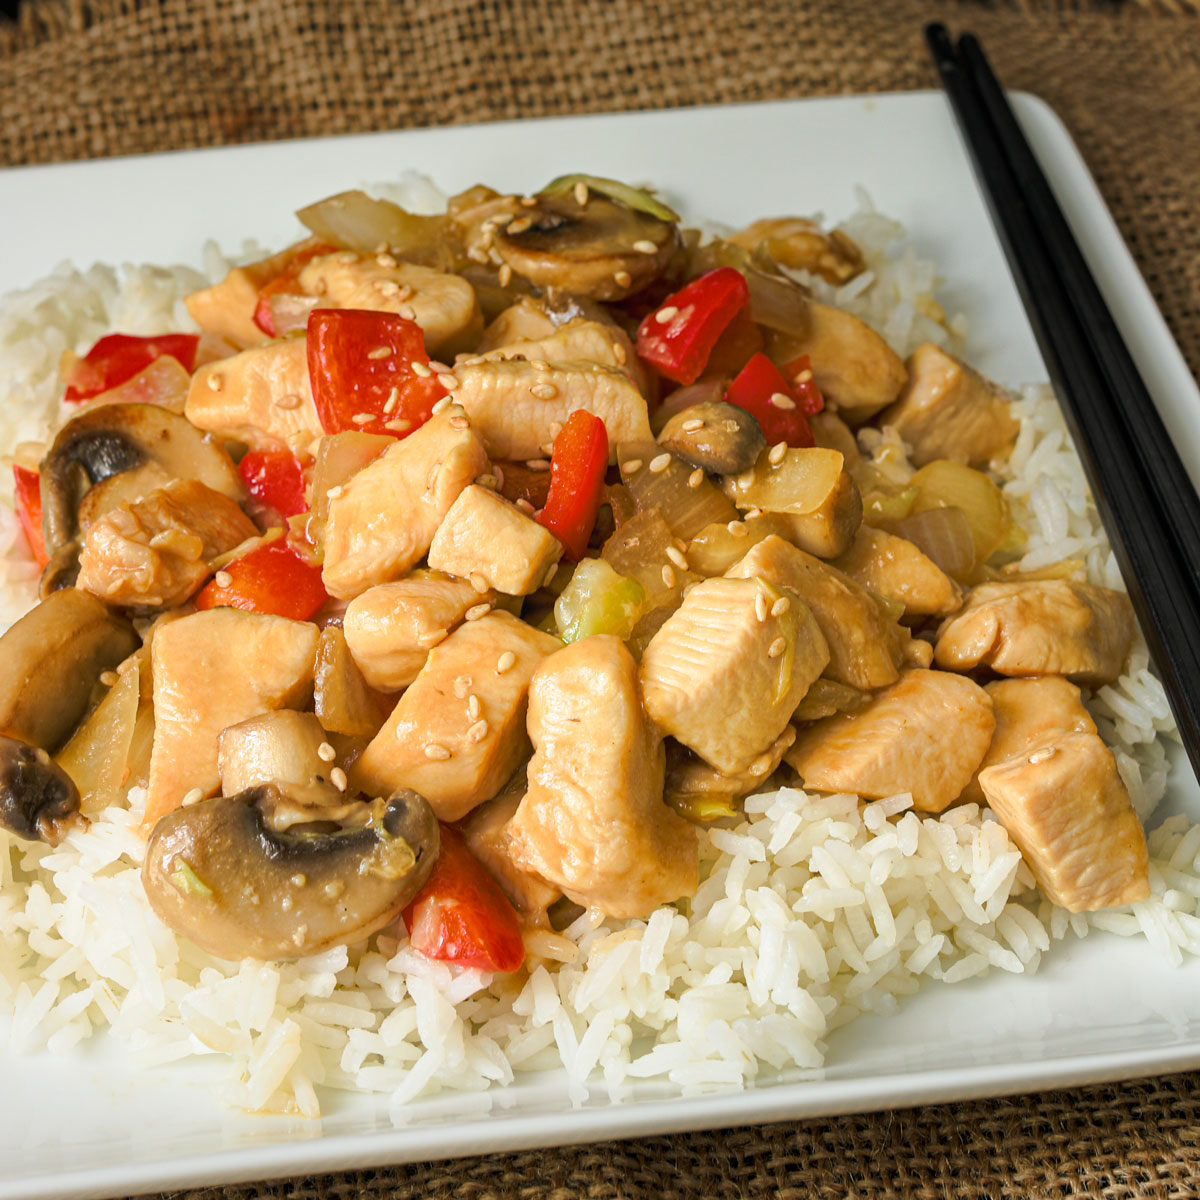 chicken stir fry on a bed of rice on a square white plate with two black chopsticks leaning on the plate.